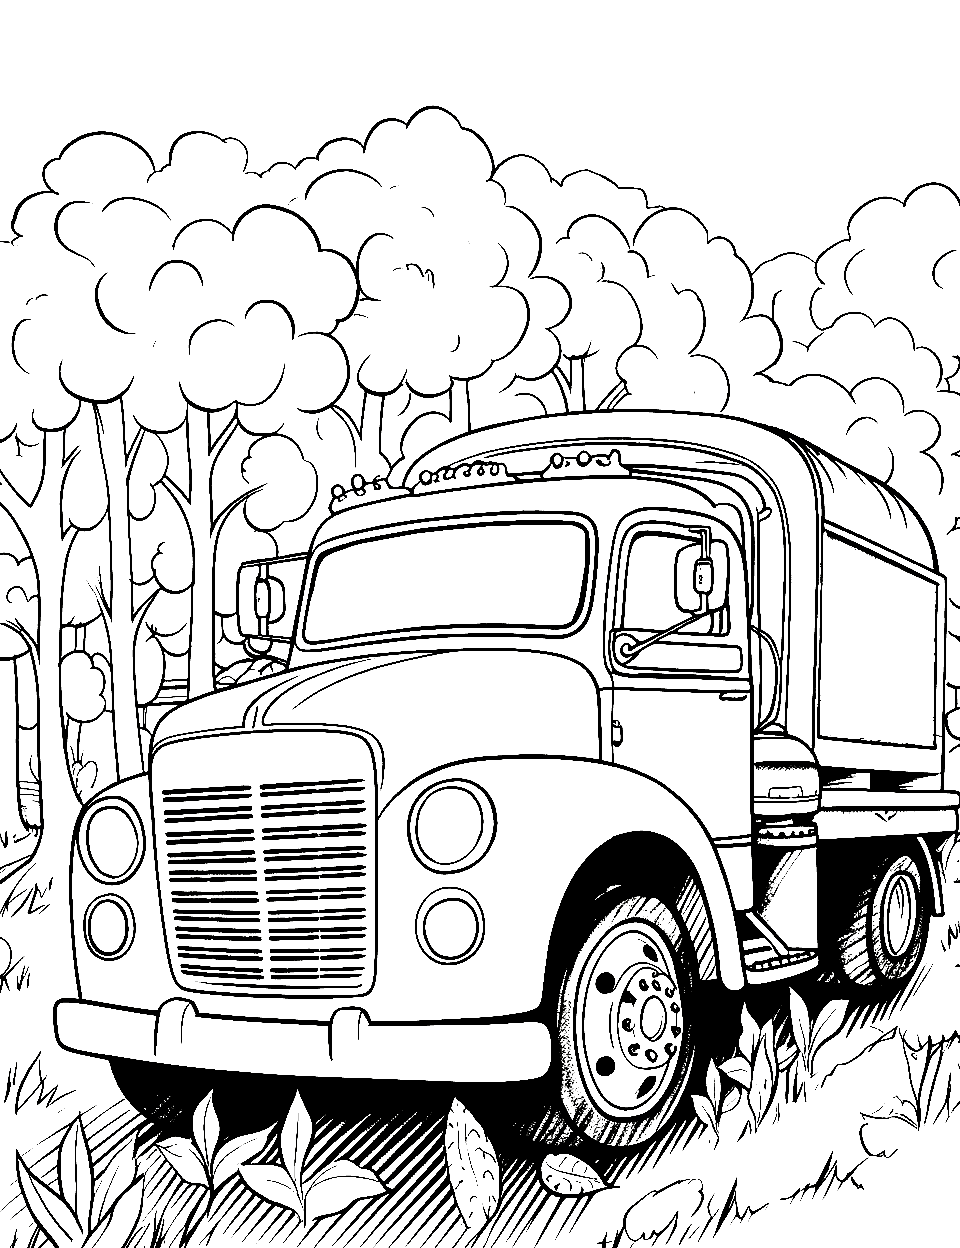 Forest Drive Coloring Page - A mini truck driving through a leafy jungle forest.